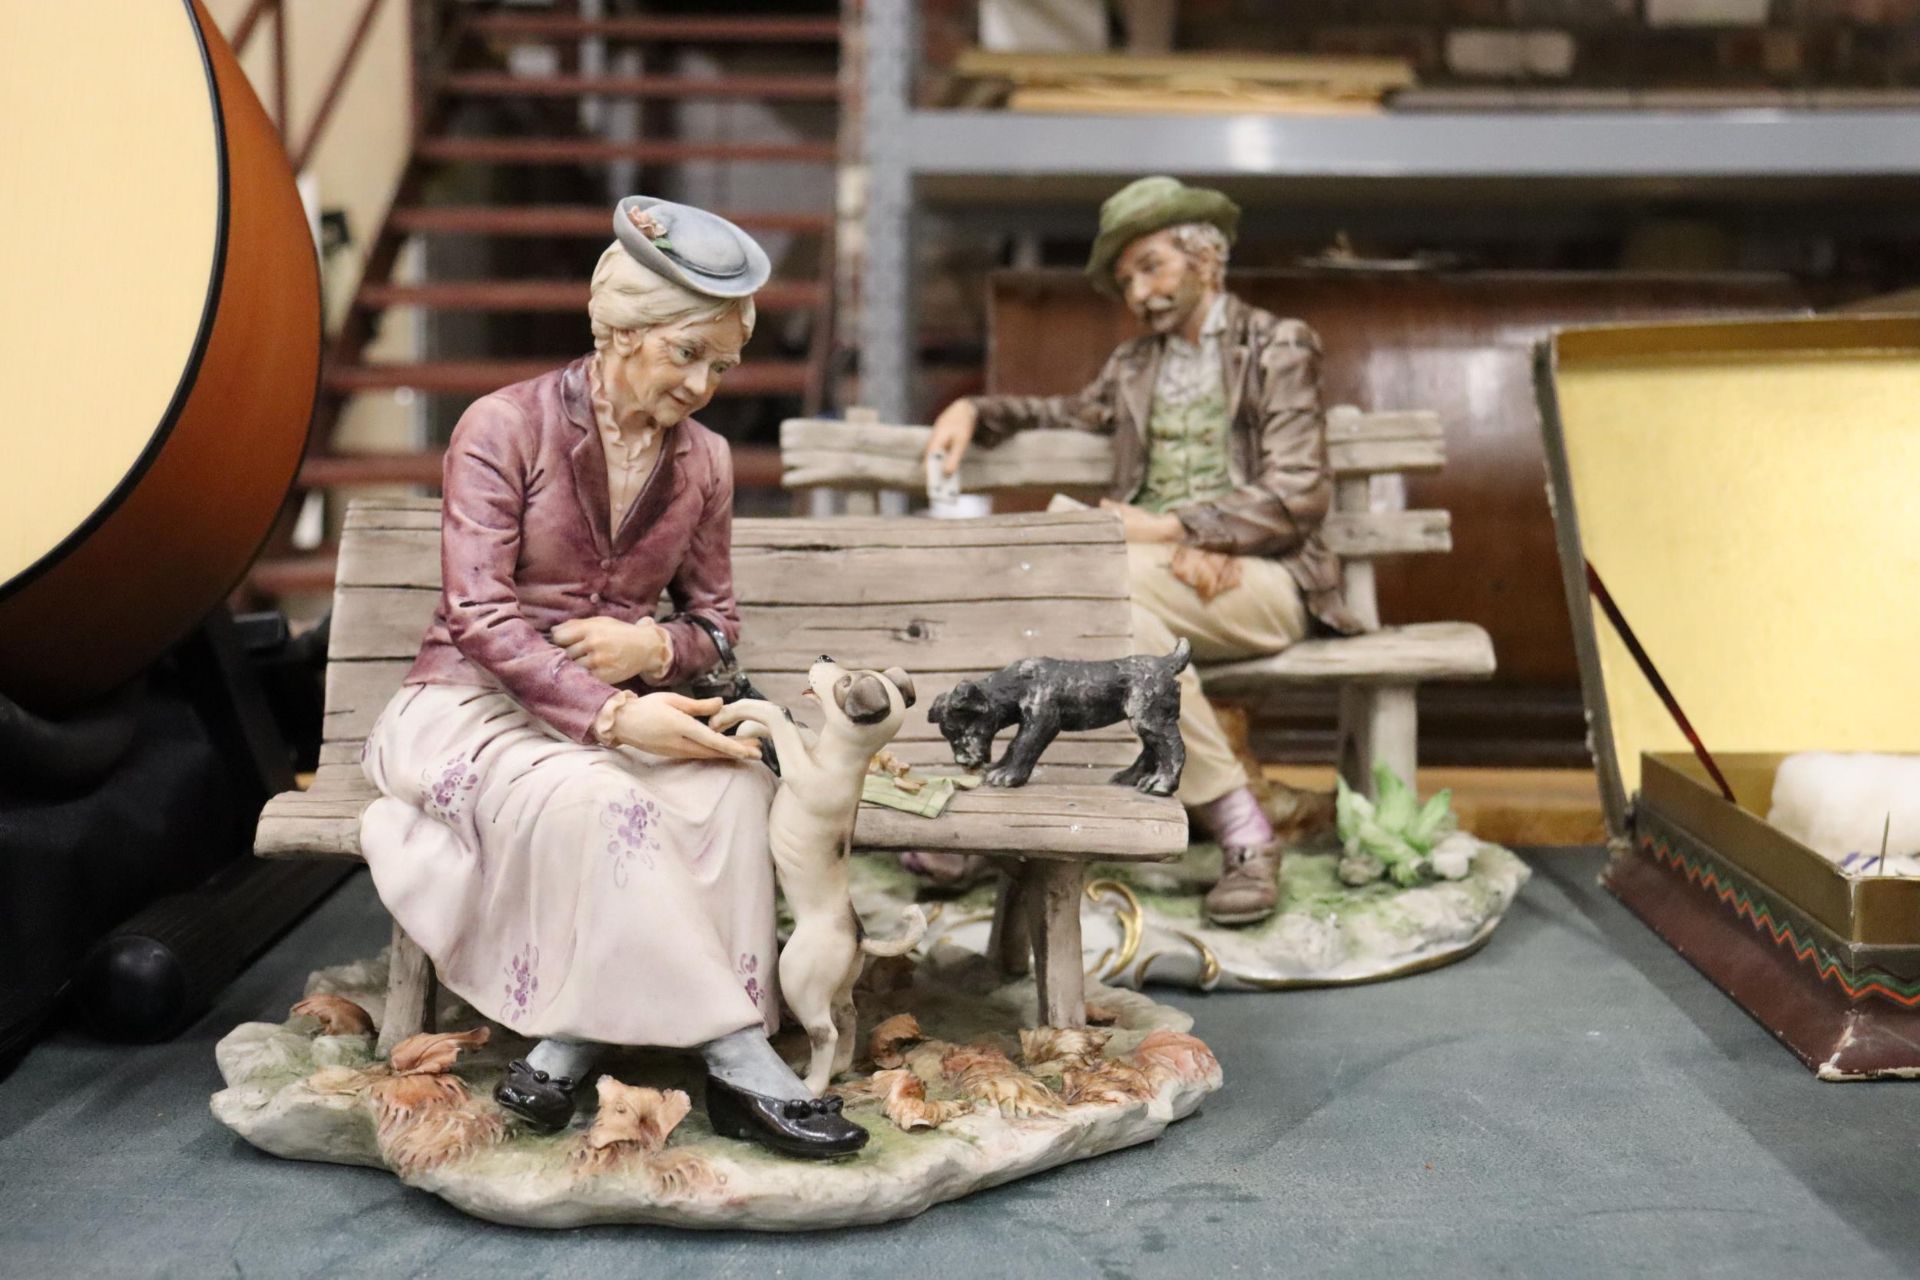 TWO CAPODIMONTE STYLE ORNAMENTS, A MAN ON A BENCH PLAYING CARDS AND A LAWITH DOGSDY ON A BENCH